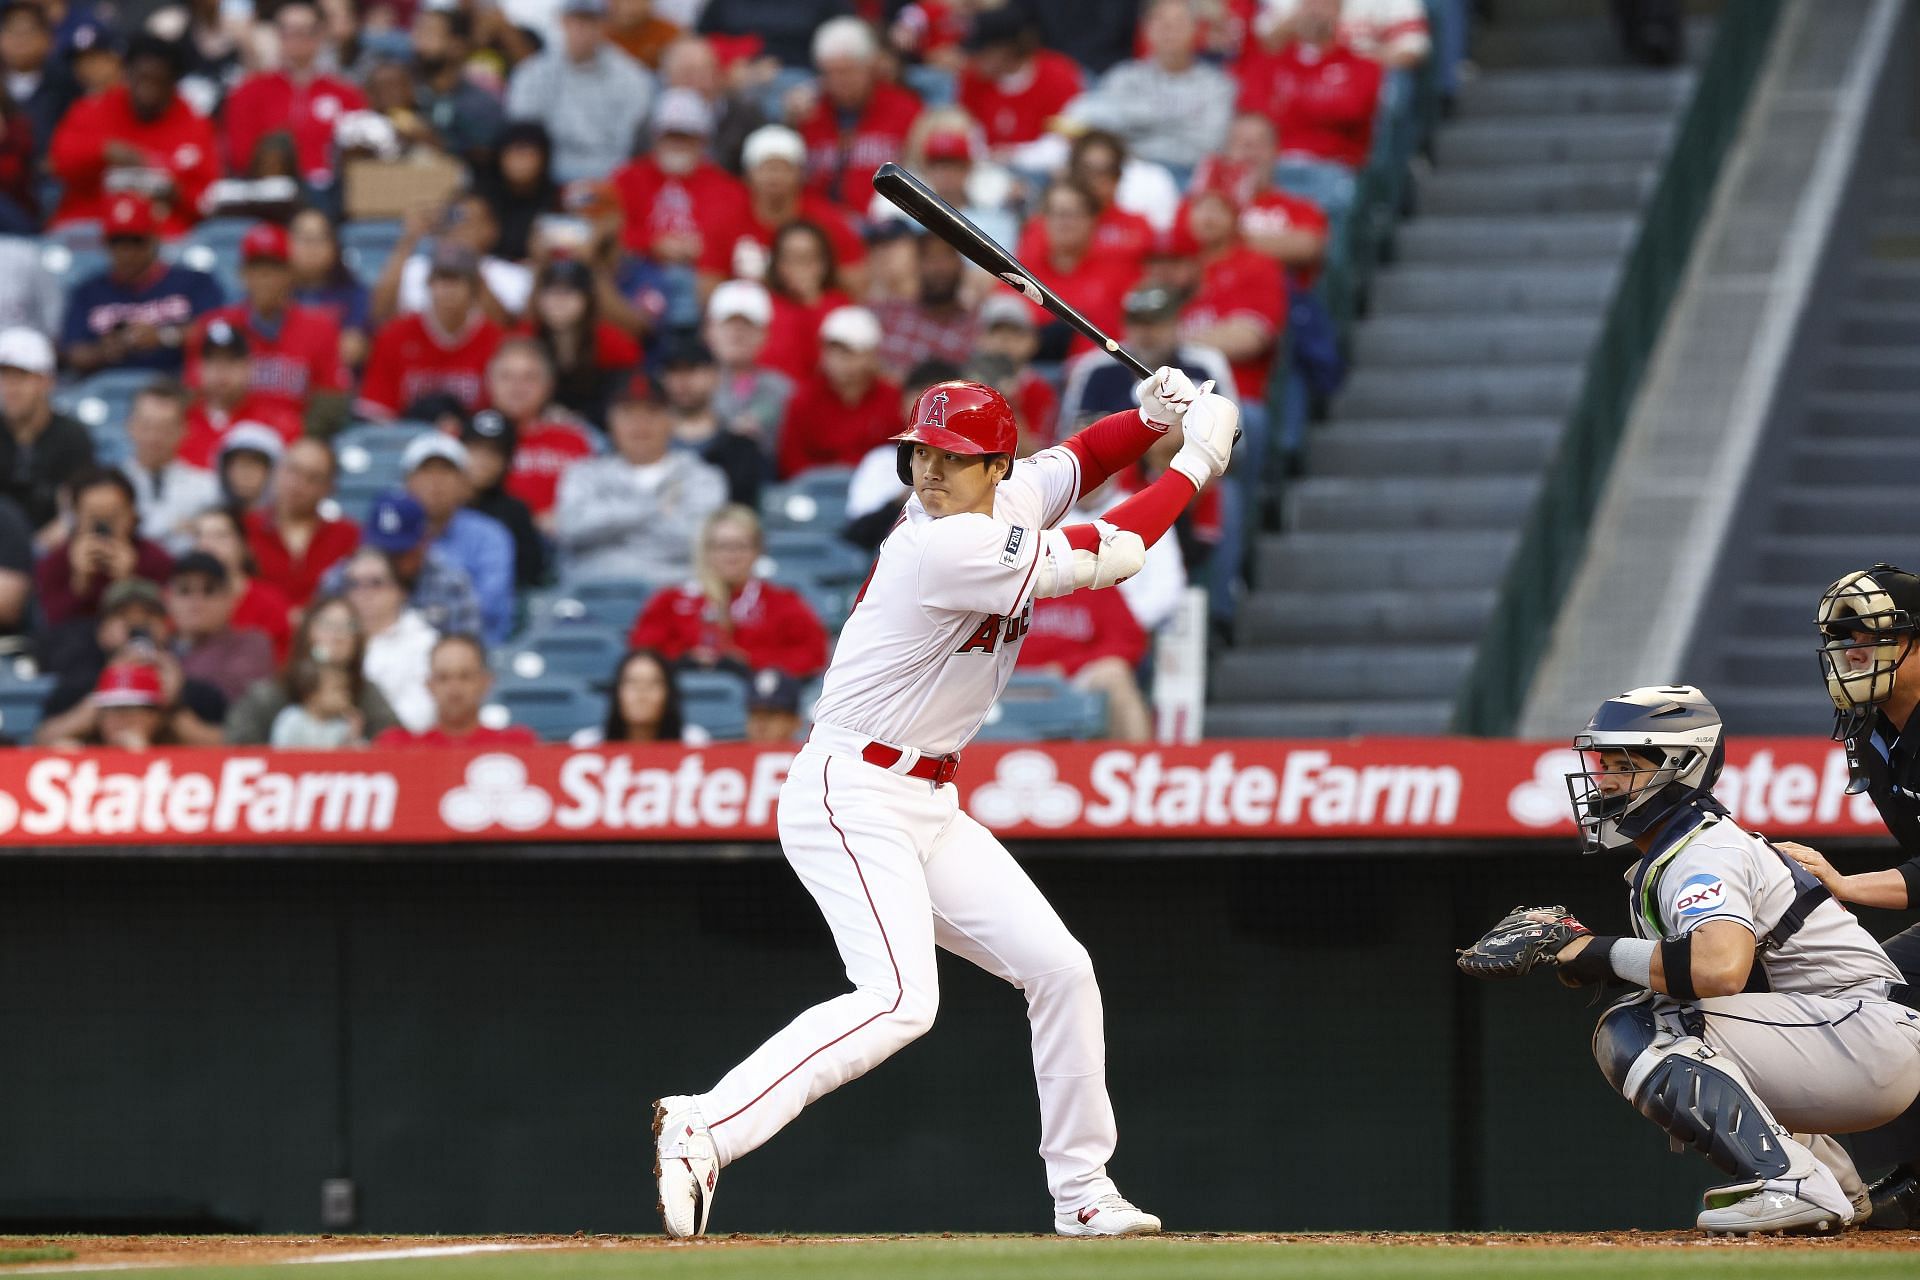 Will Shohei Ohtani join the cross-town Dodgers?